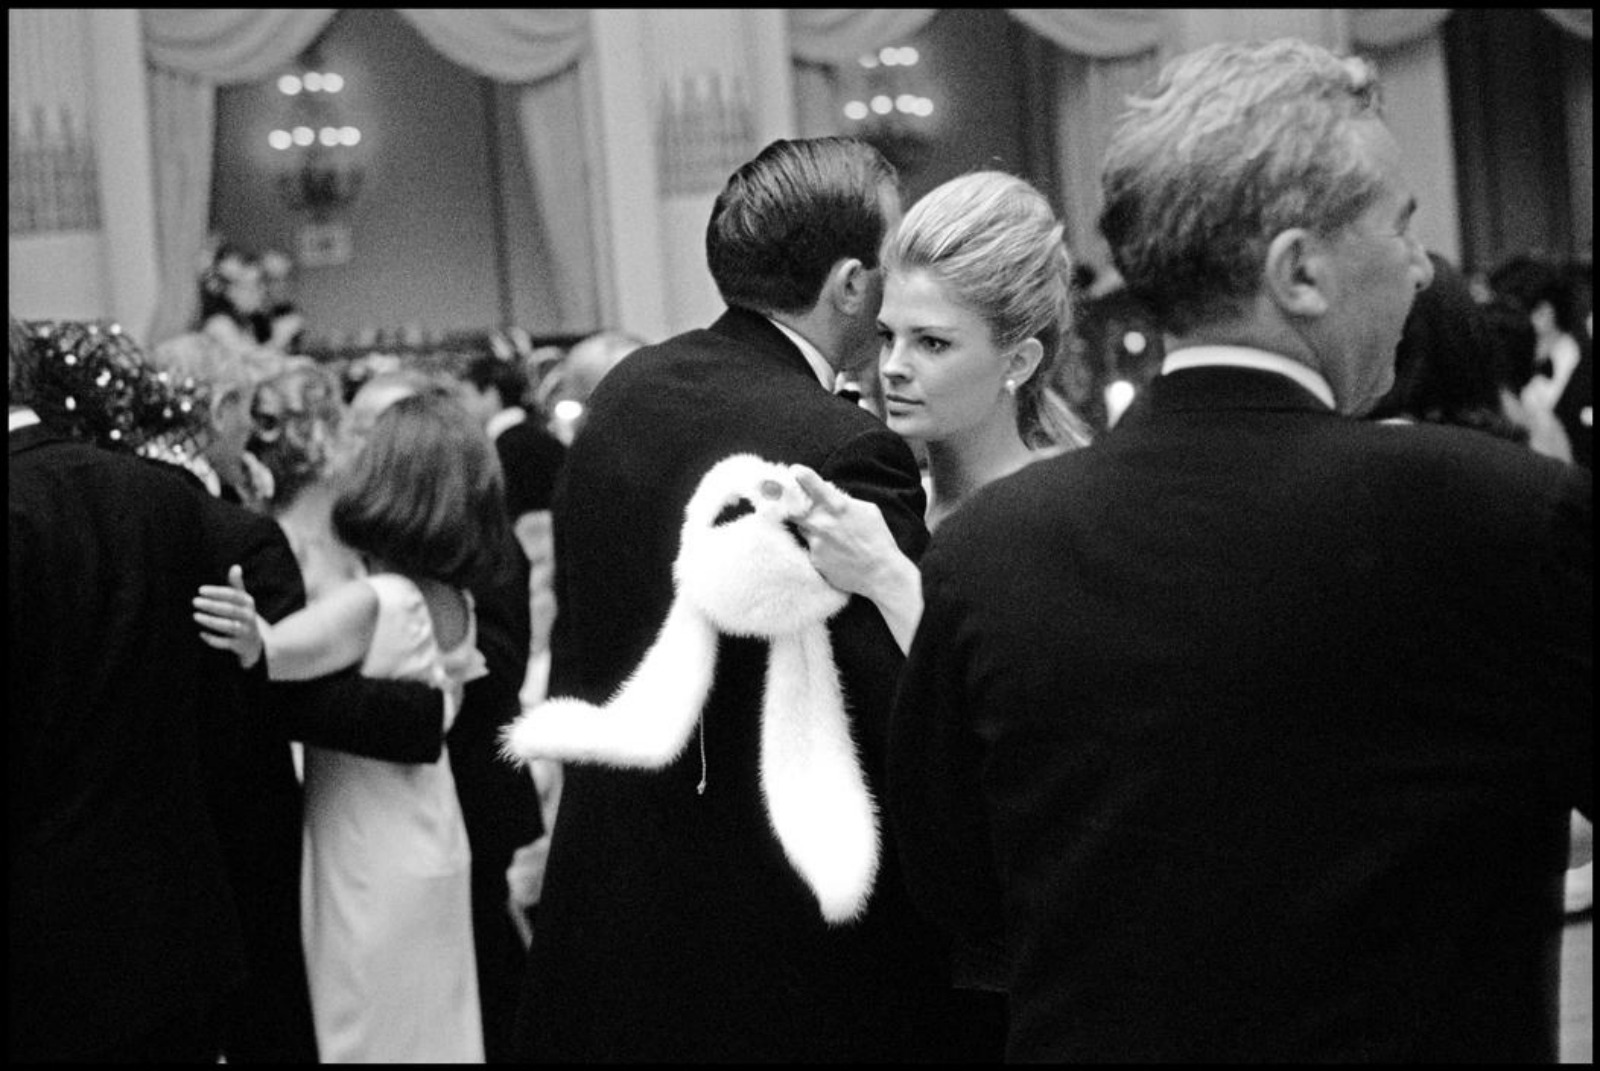 FACE-OFF...Candice Bergen takes a break from the mask at Capote's ball